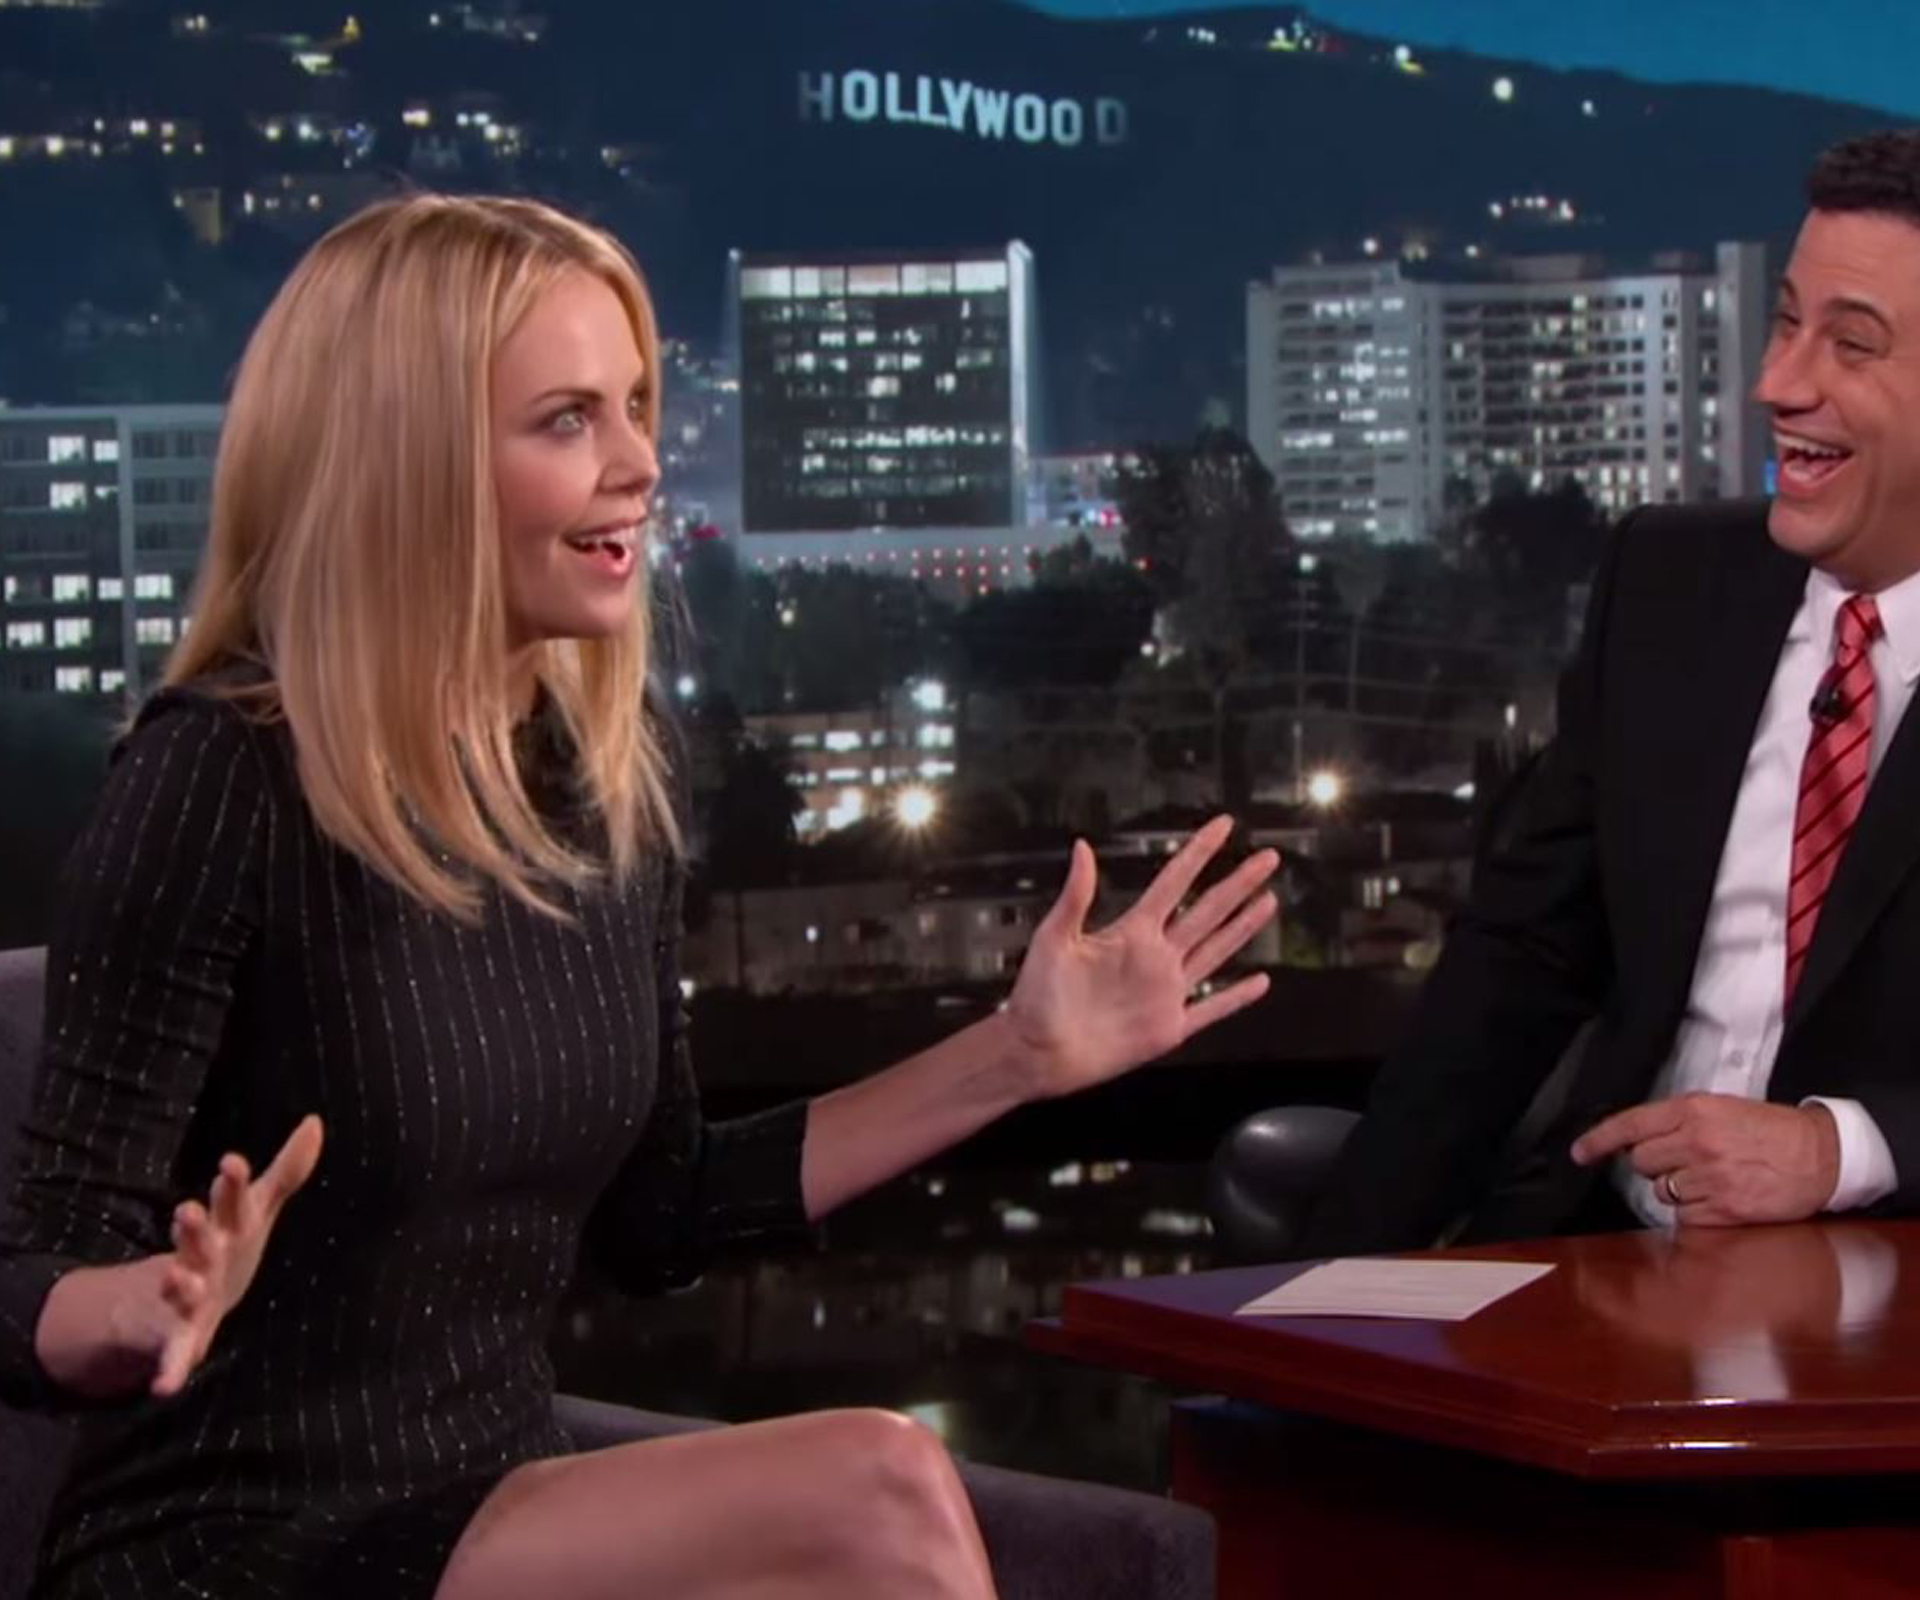 Charlize Theron reveals her embarrassing moment with President Obama